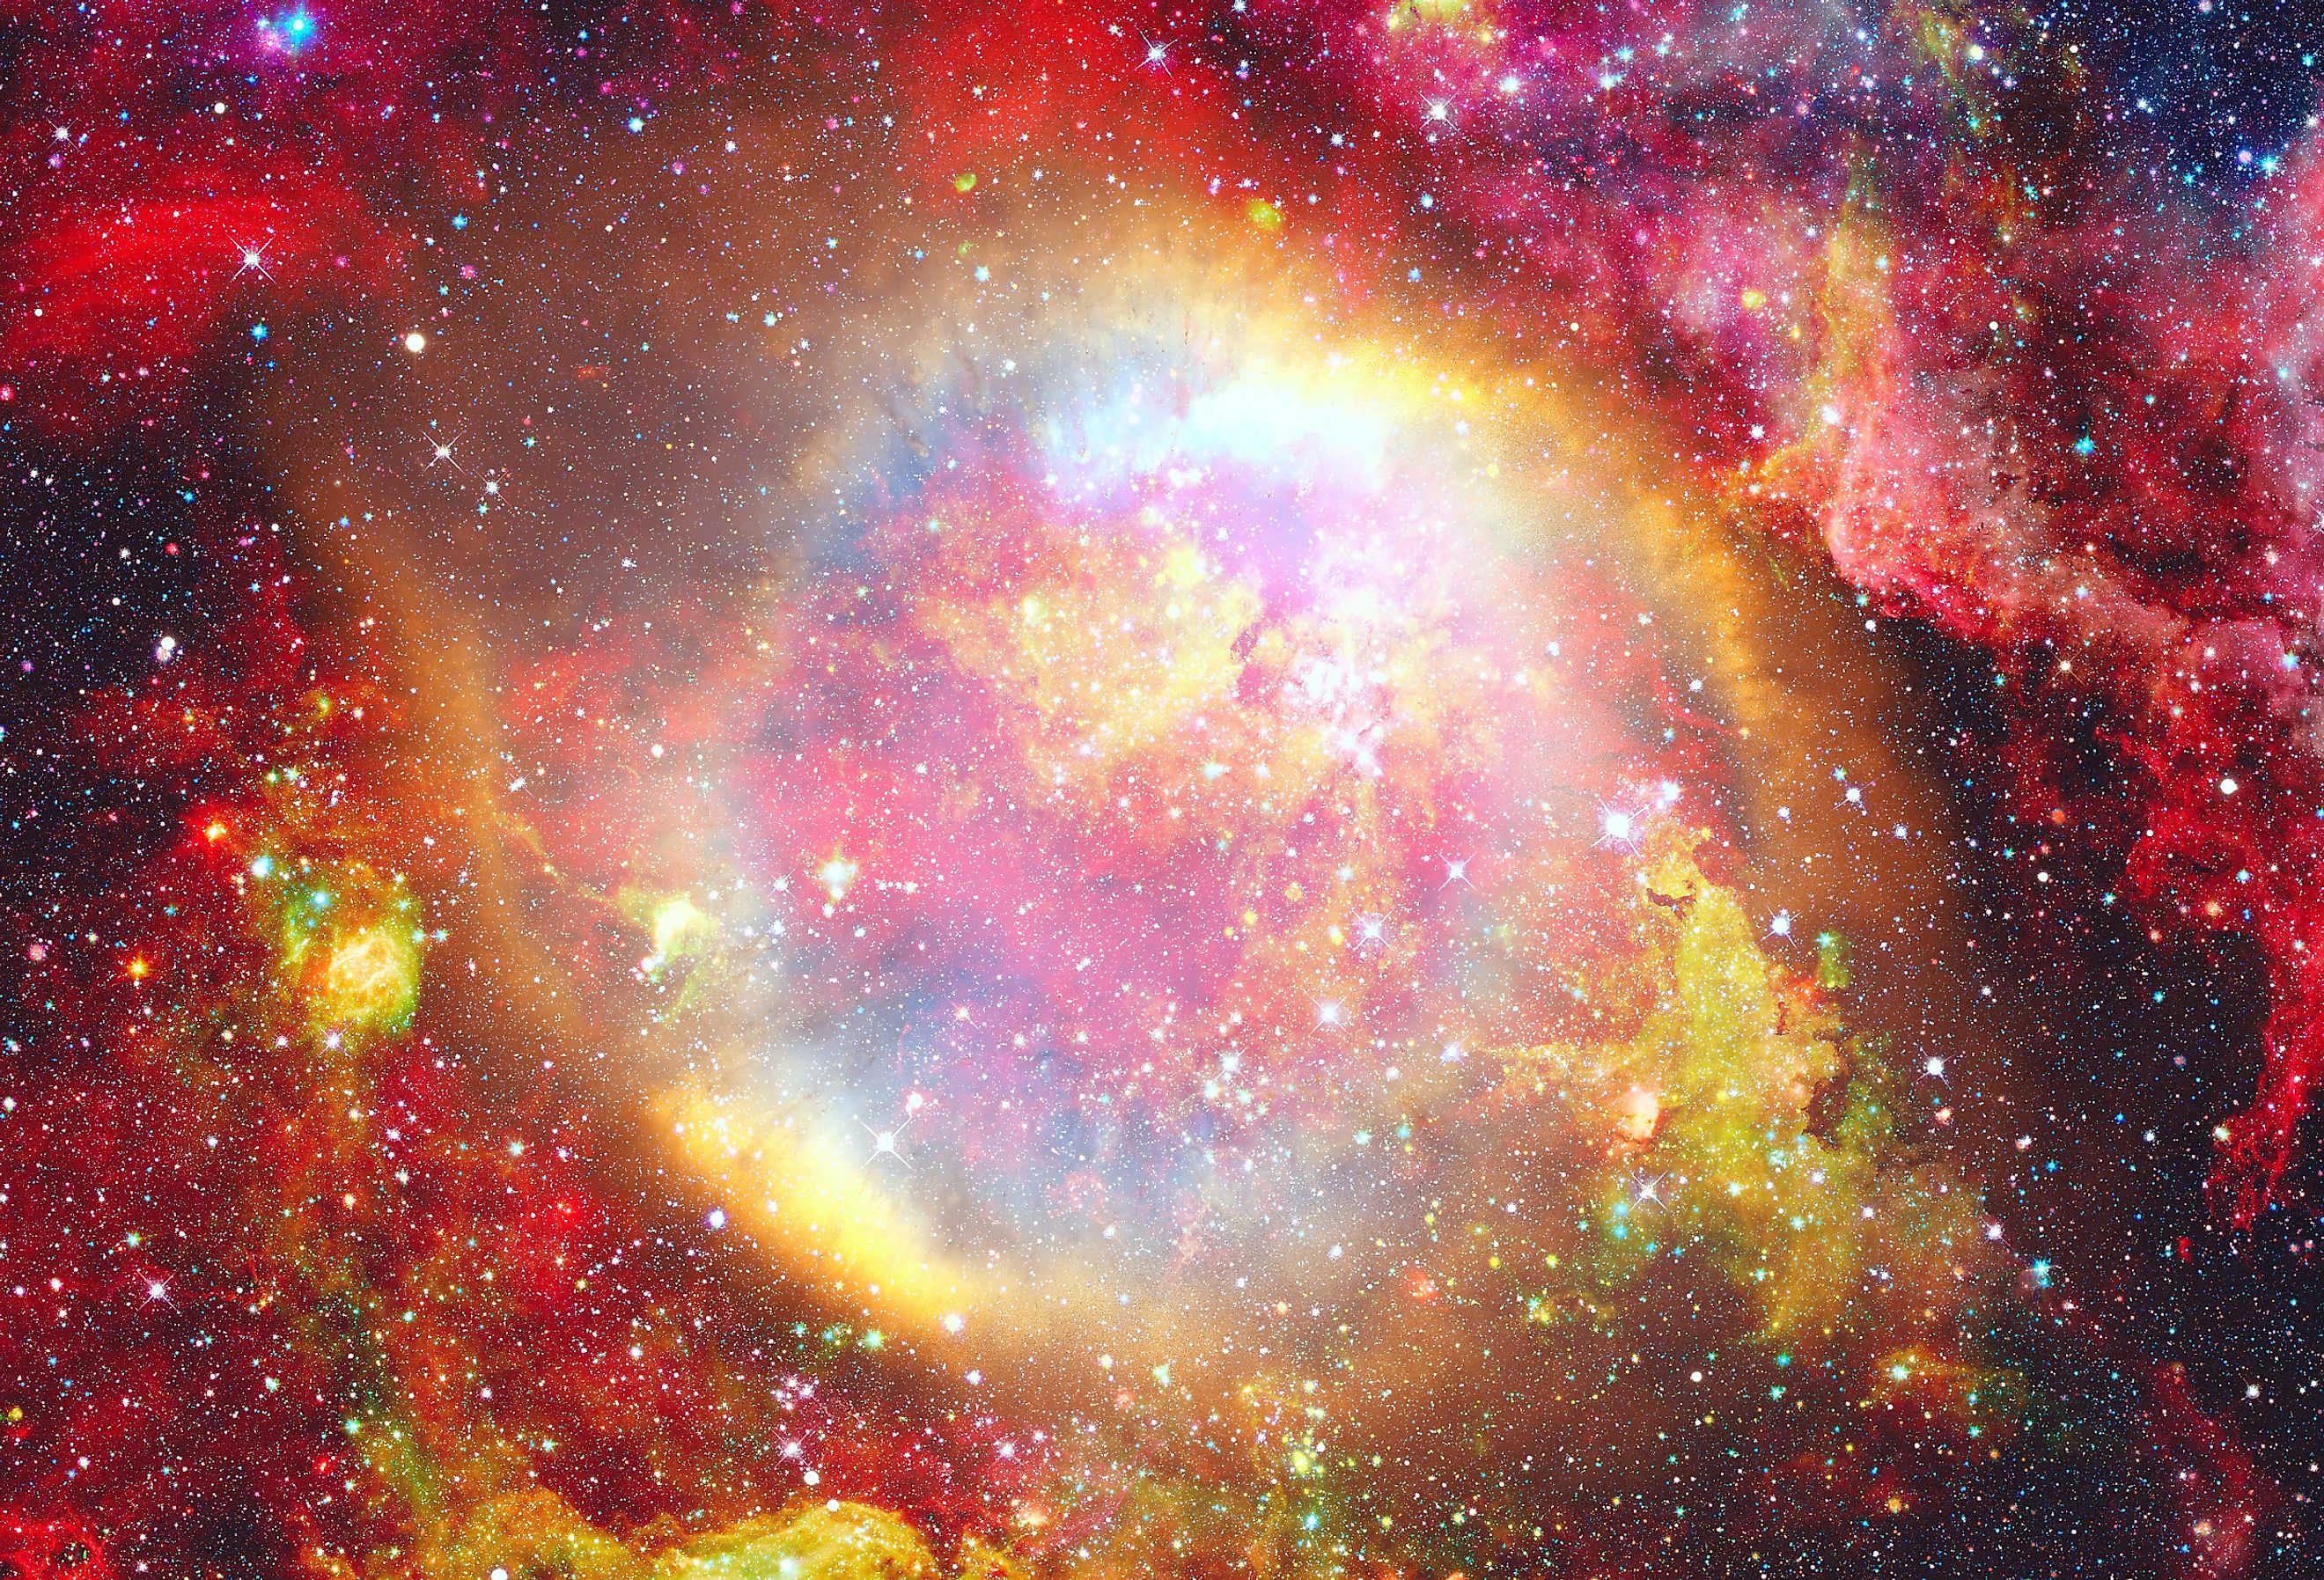 Colorful supernova explosion with glowing nebula in the background.